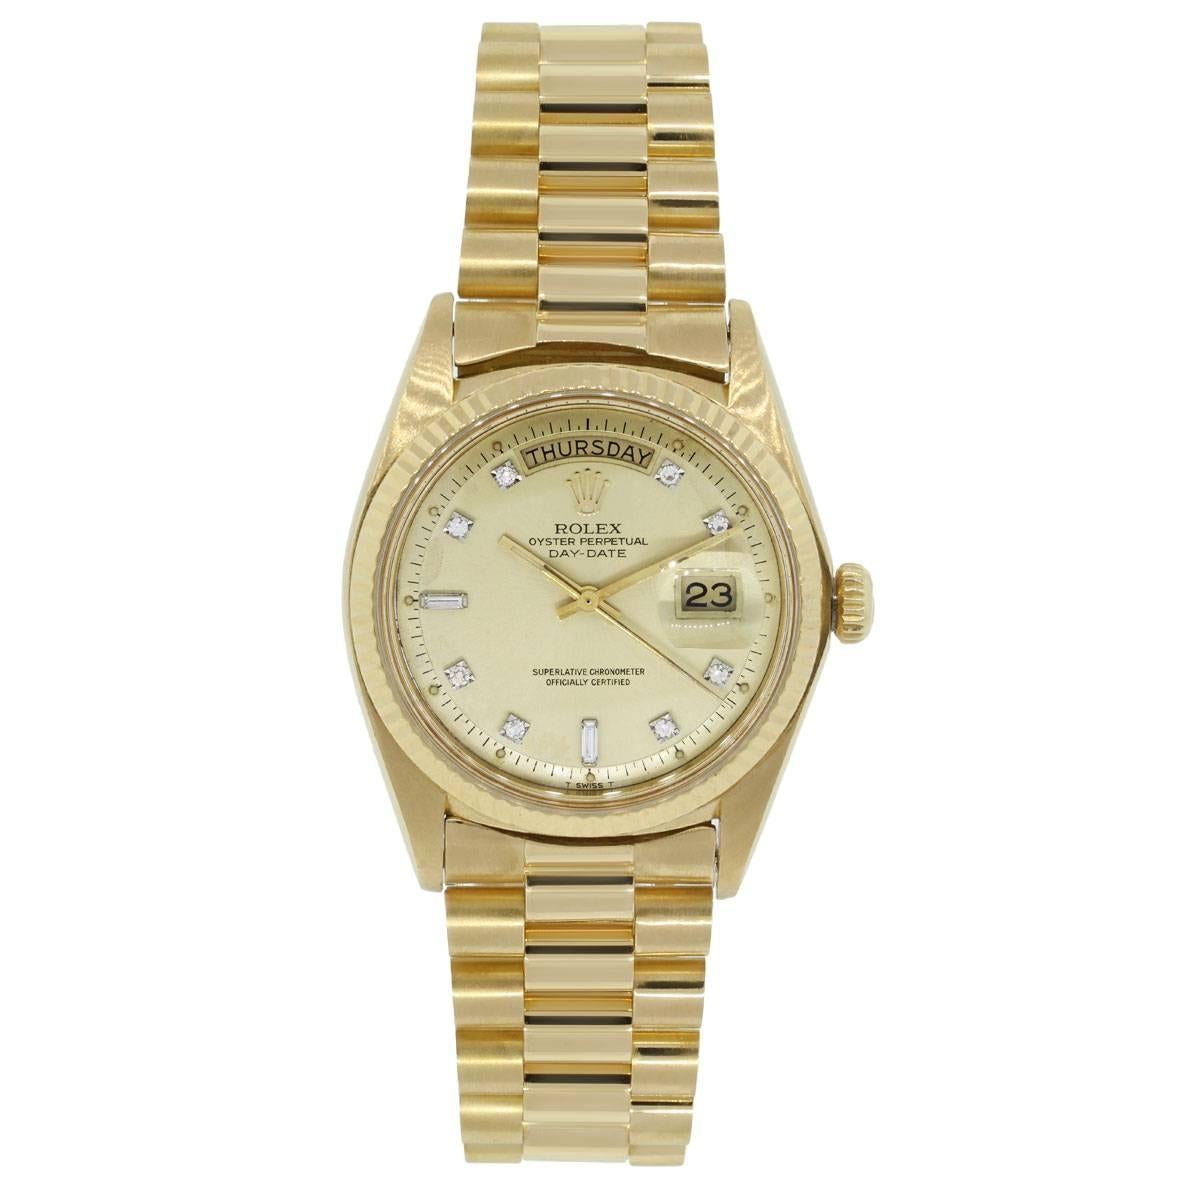 Brand: Rolex
MPN: 1803
Model: Day-Date
Case Material: 18k Yellow Gold
Case Diameter: 36mm
Crystal: Plastic
Bezel: 18k yellow gold fluted bezel
Dial: Yellow gold diamond day date dial (aftermarket)
Bracelet: Presidential bracelet (aftermarket)
Size: